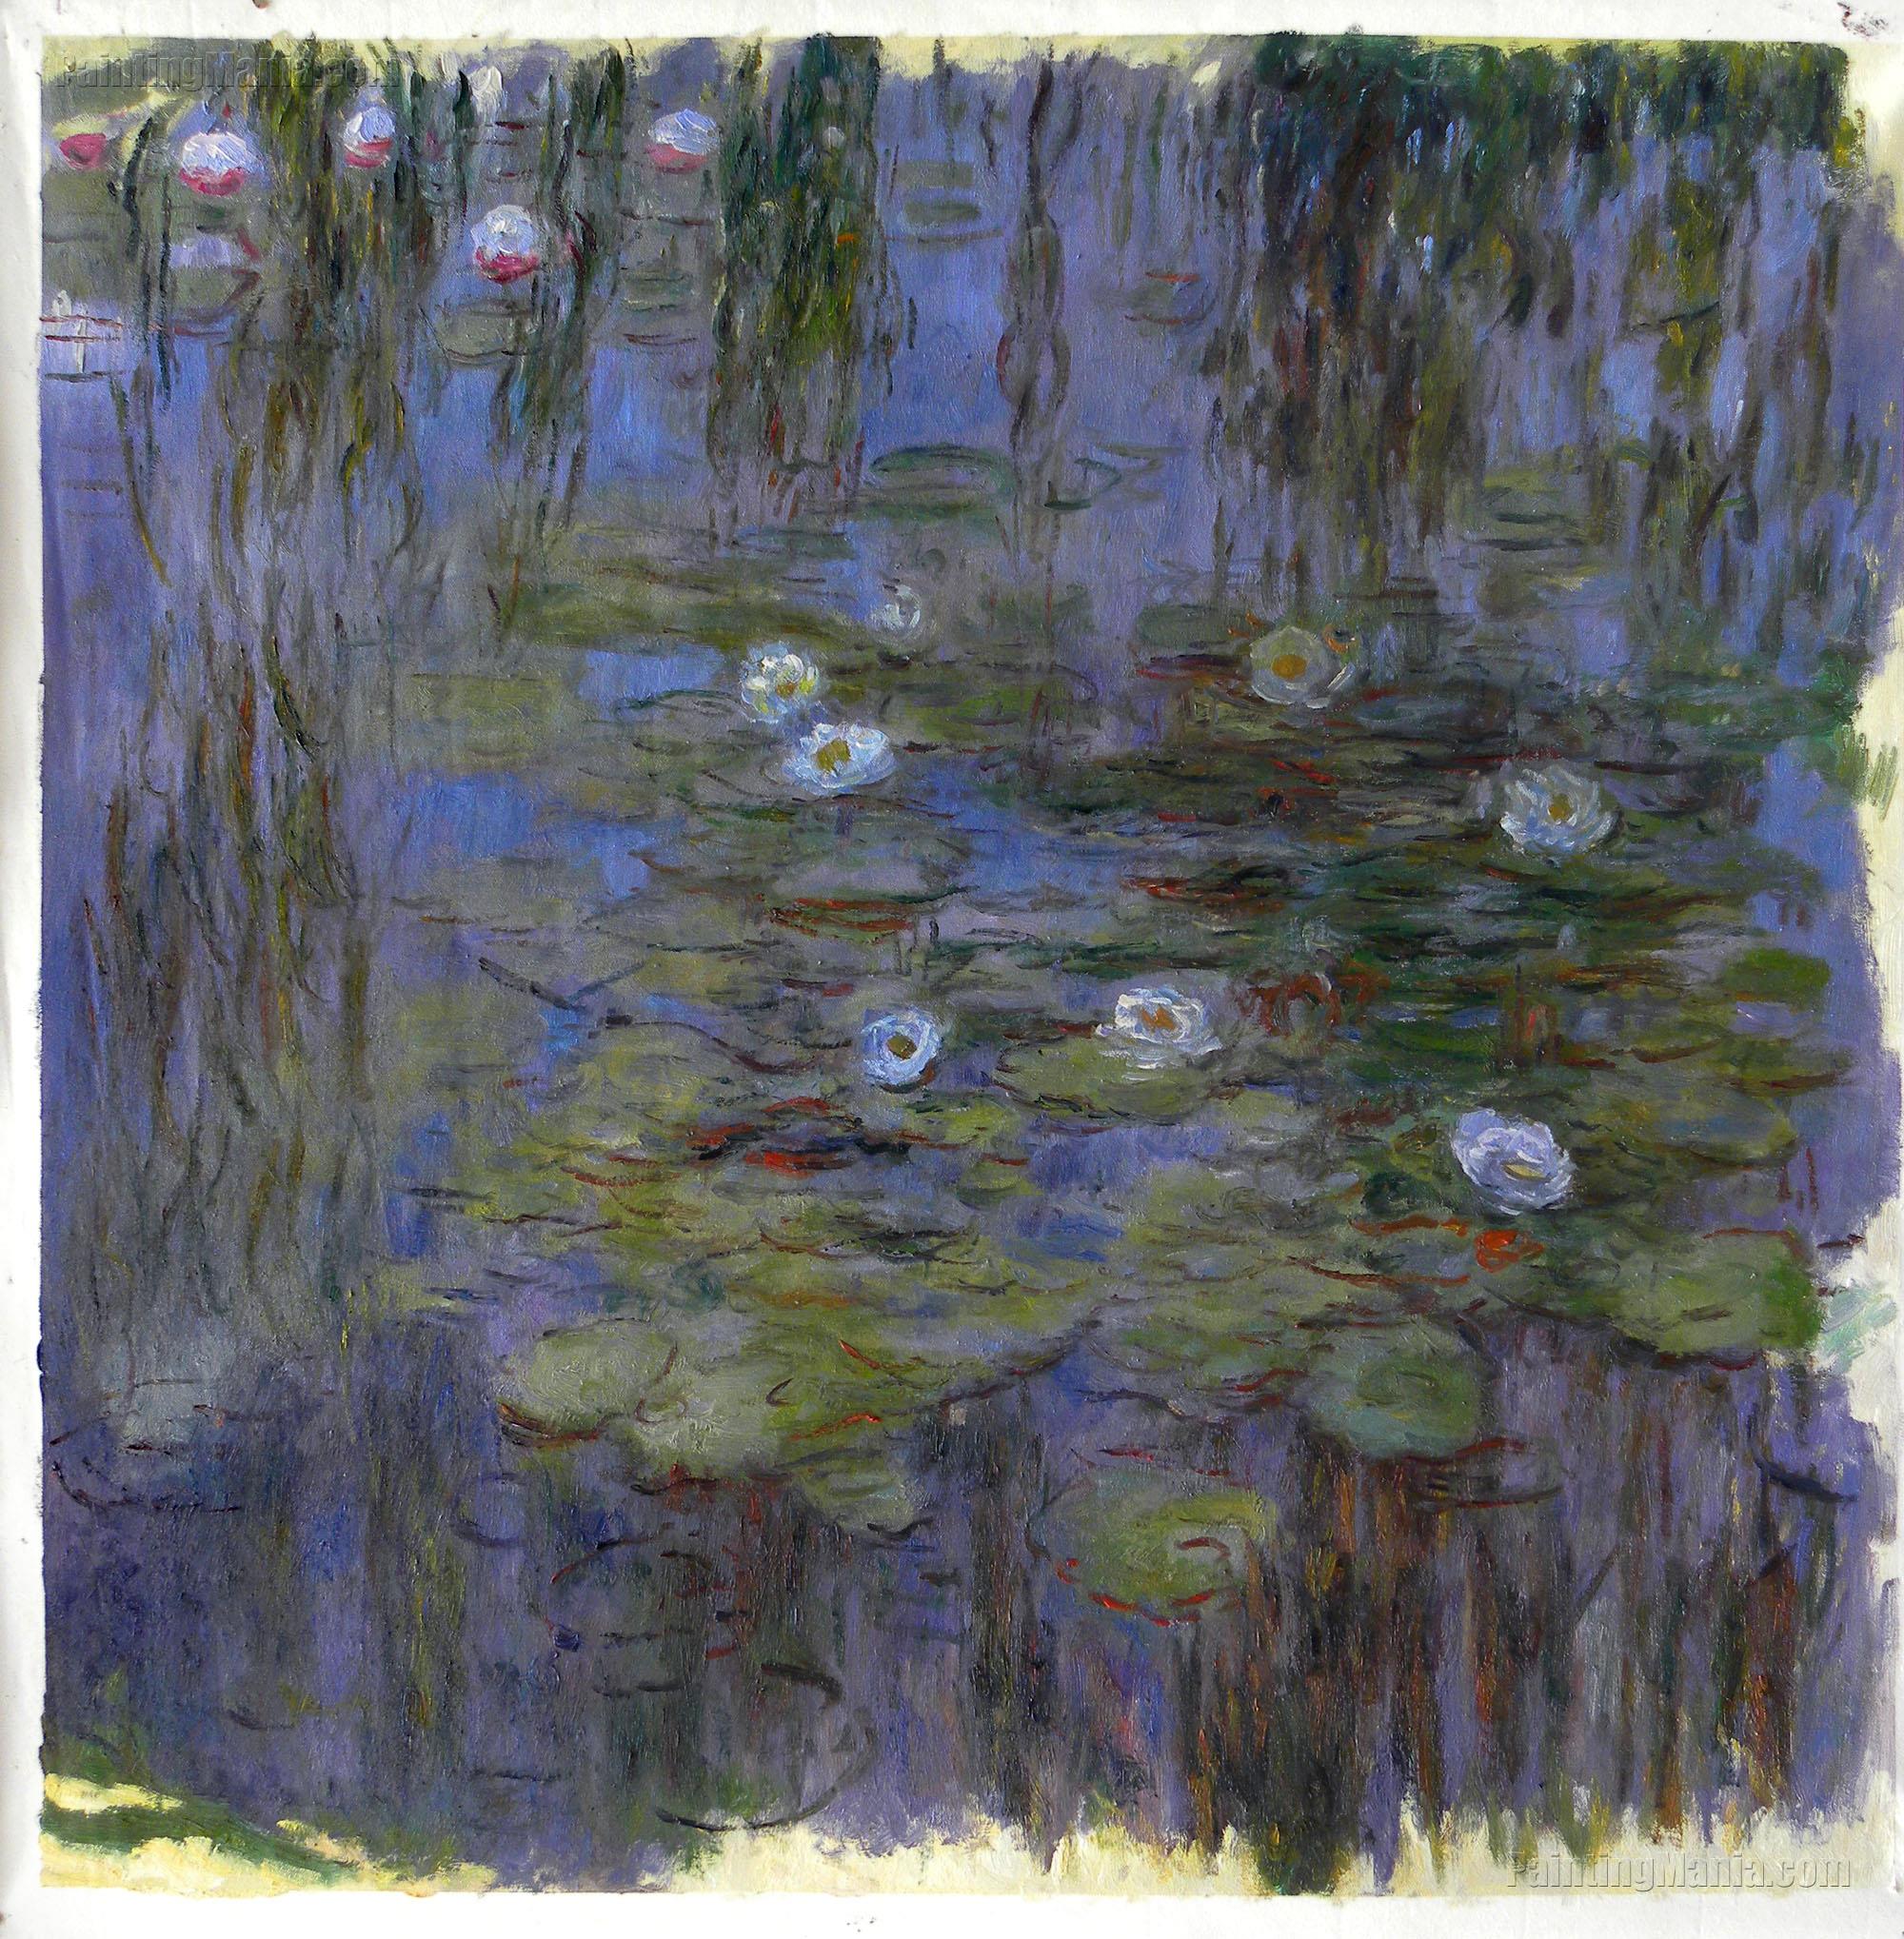 Water Lilies Hand Painted Claude Monet Oil Painting On Canvas Wall Art 20x20/"